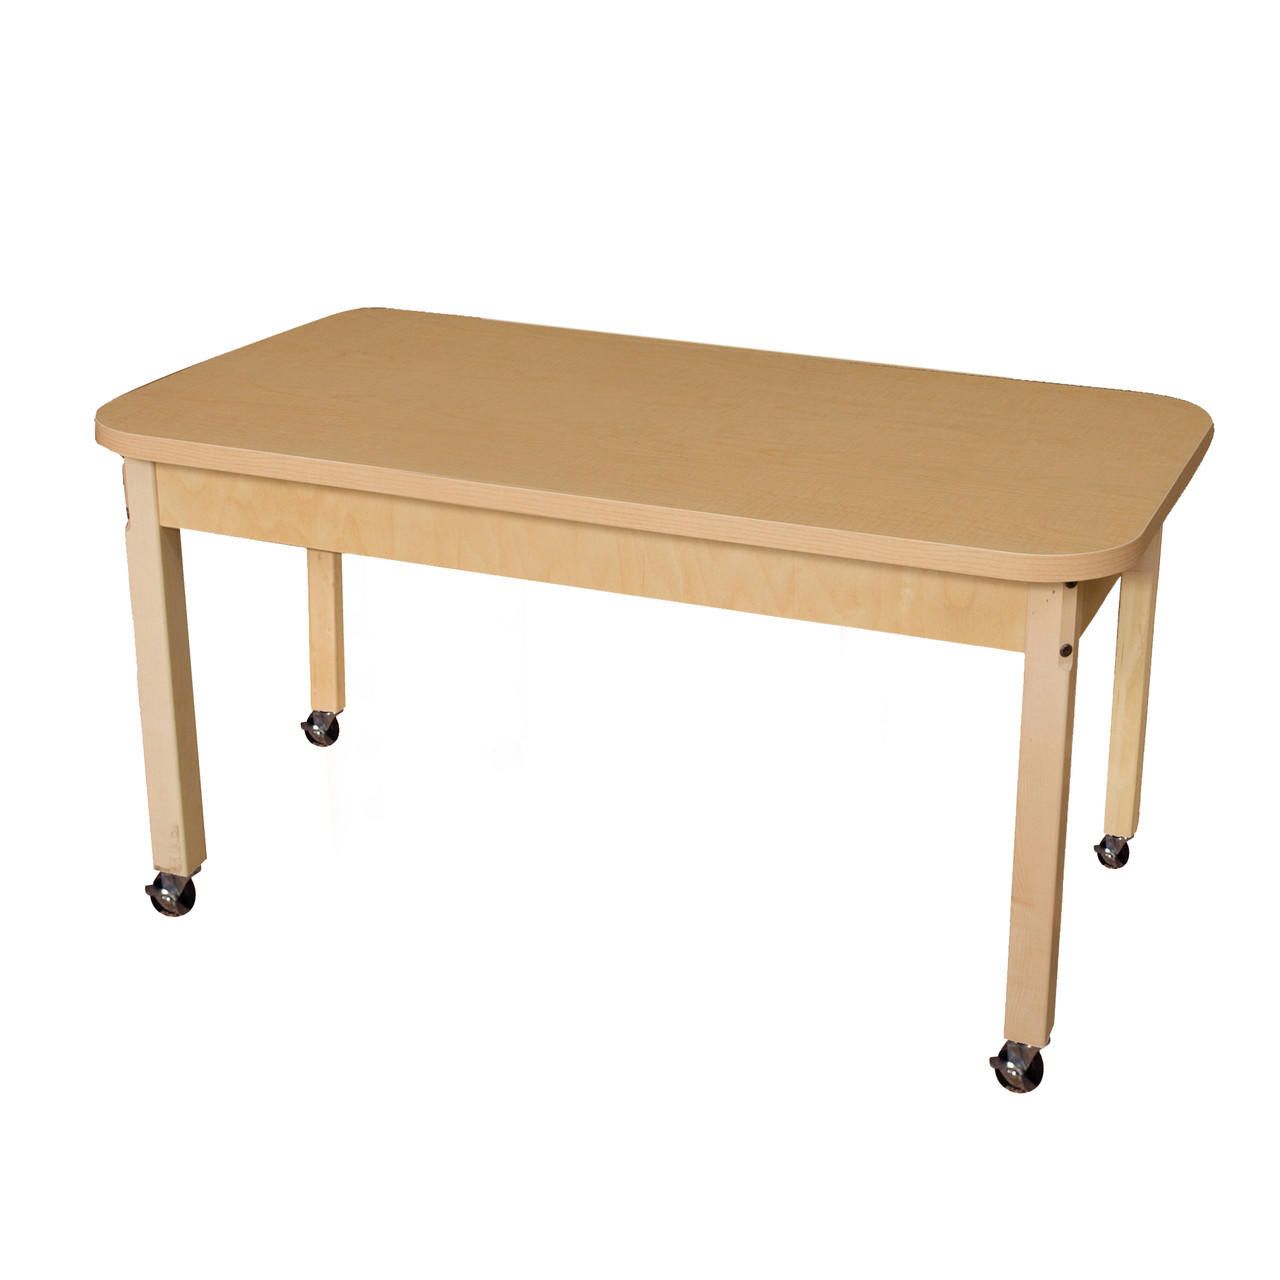 Picture of Wood Designs HPL244820C6 Mobile Rectangle High Pressure Laminate Table With Hardwood Legs- 20 in.